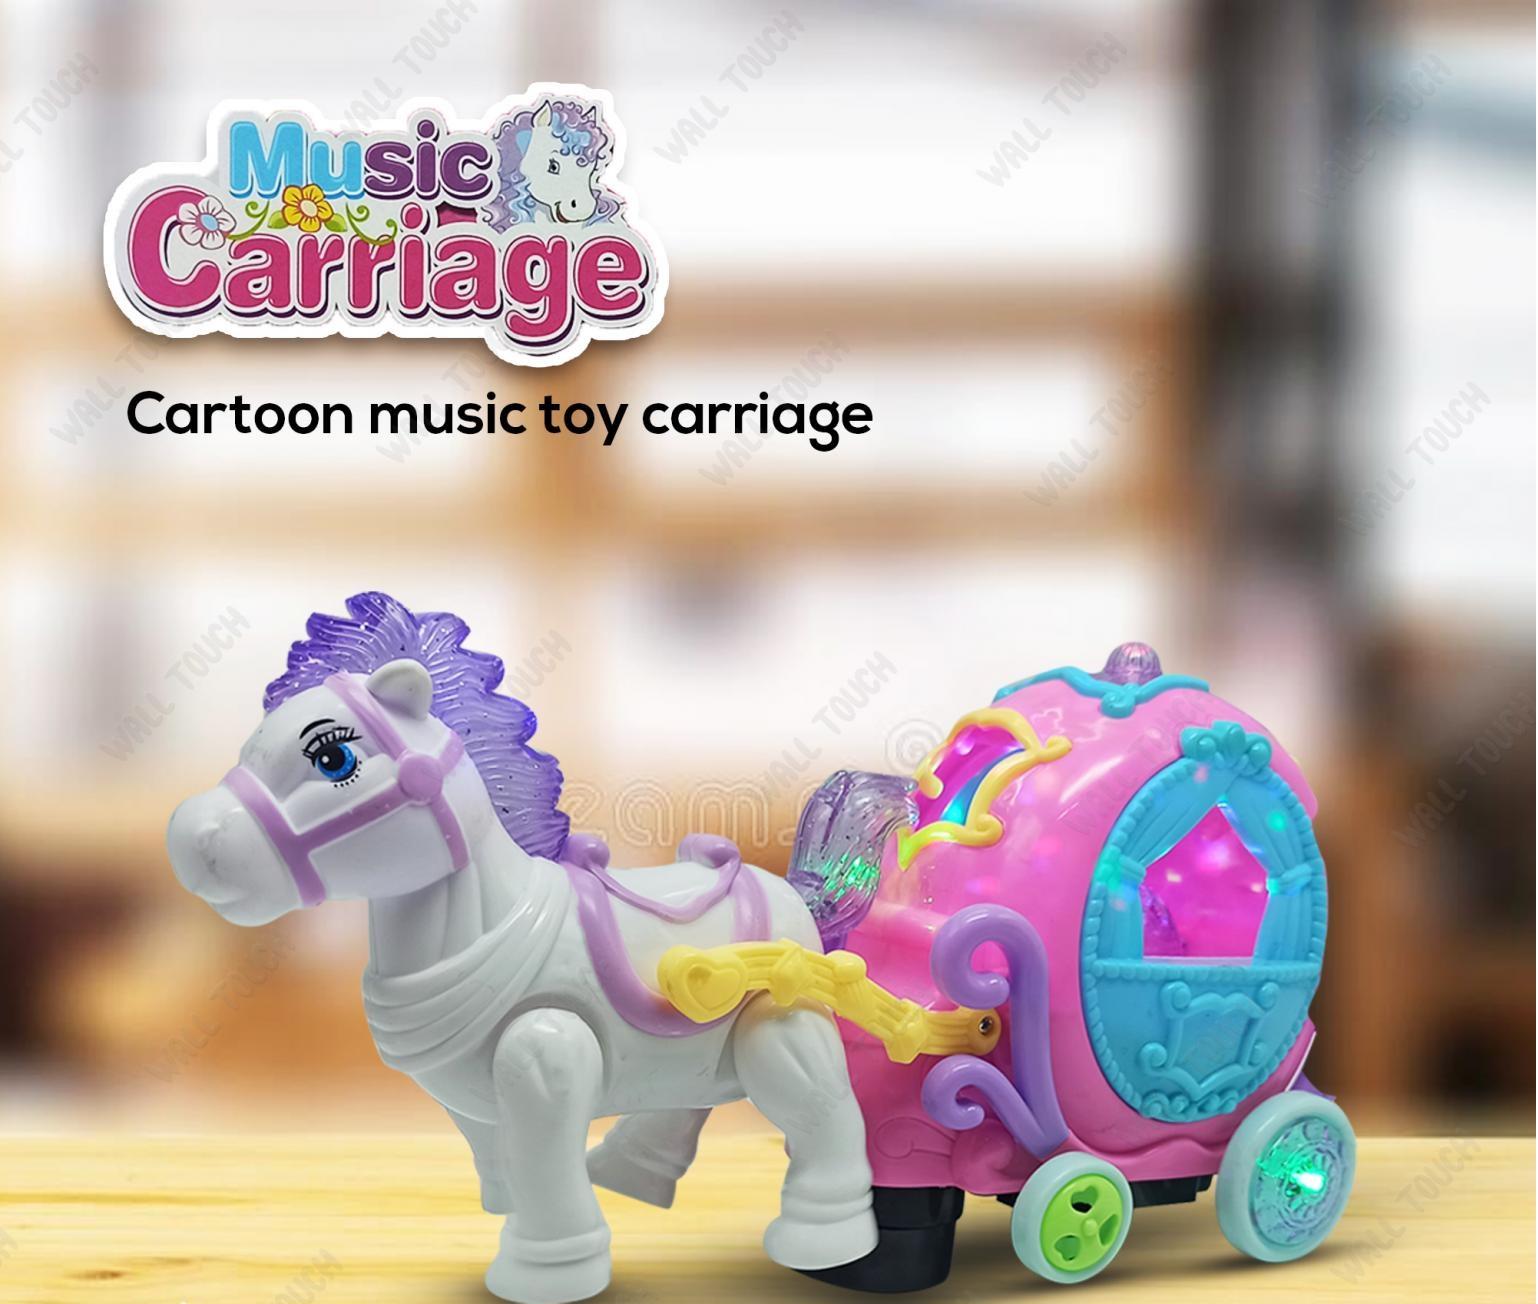 HORSE CARRIAGE Battery Operated Toys Cartoon Music Toy Carriage Set With Light And Music For Kids